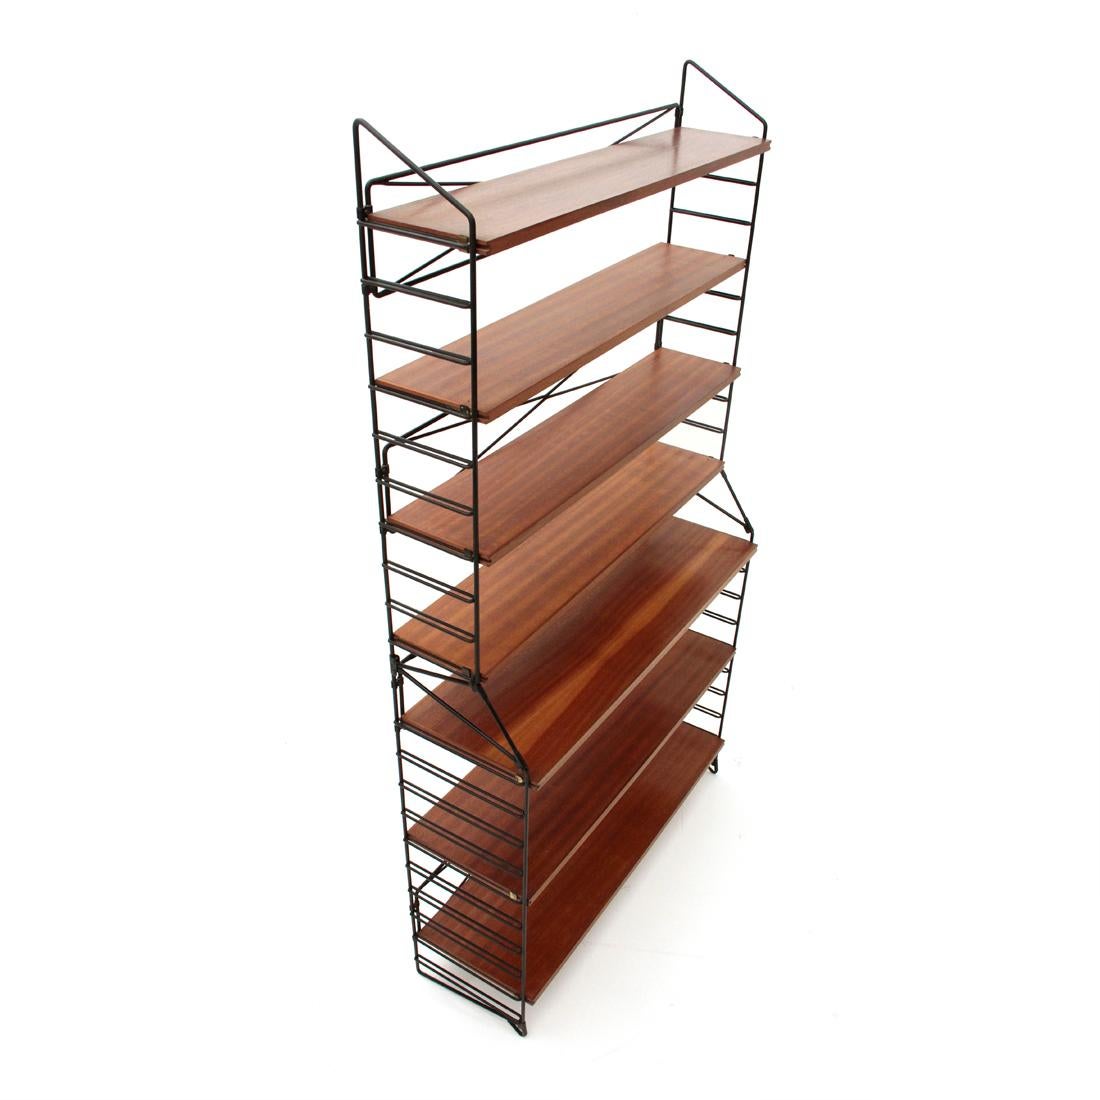 Mid-20th Century Italian Bookcase with Shelves in Teak, 1960s